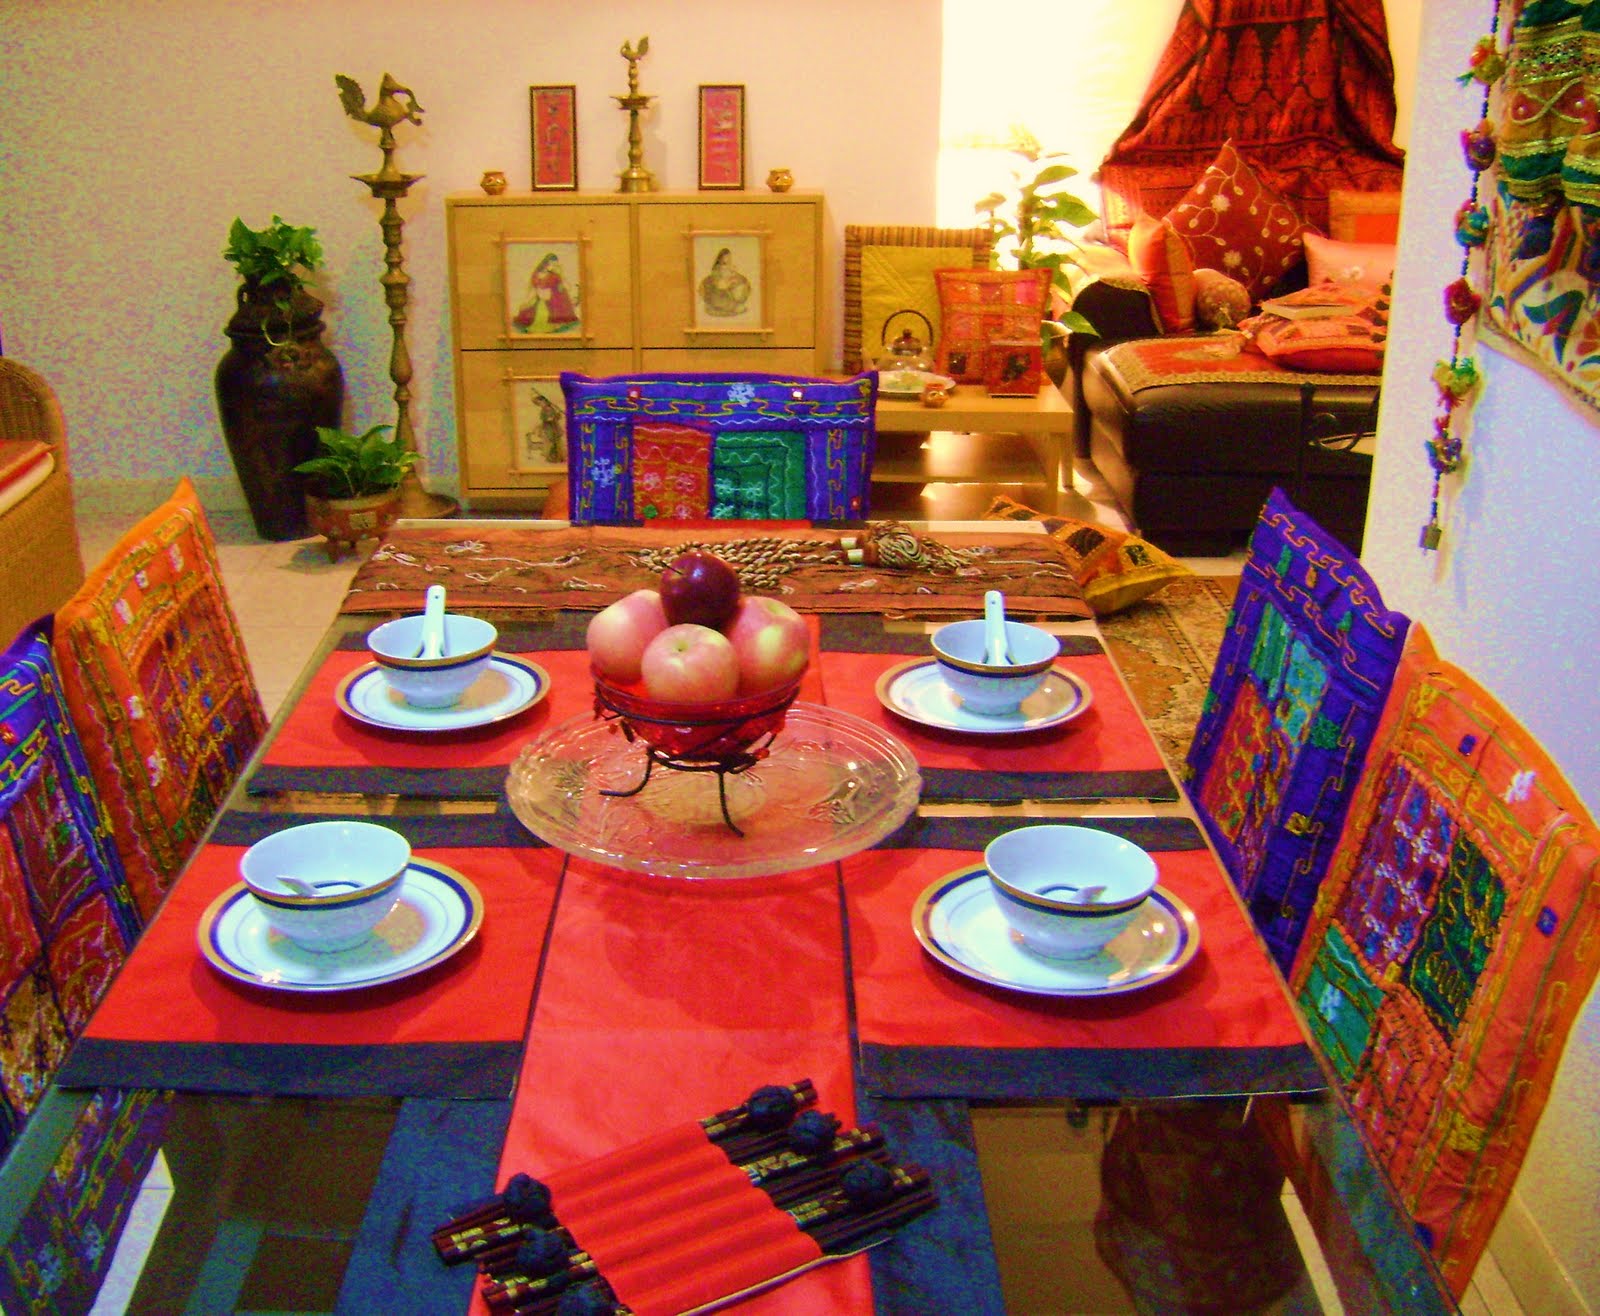 Ethnic Indian Decor: An Ethnic Indian Home in Singapore